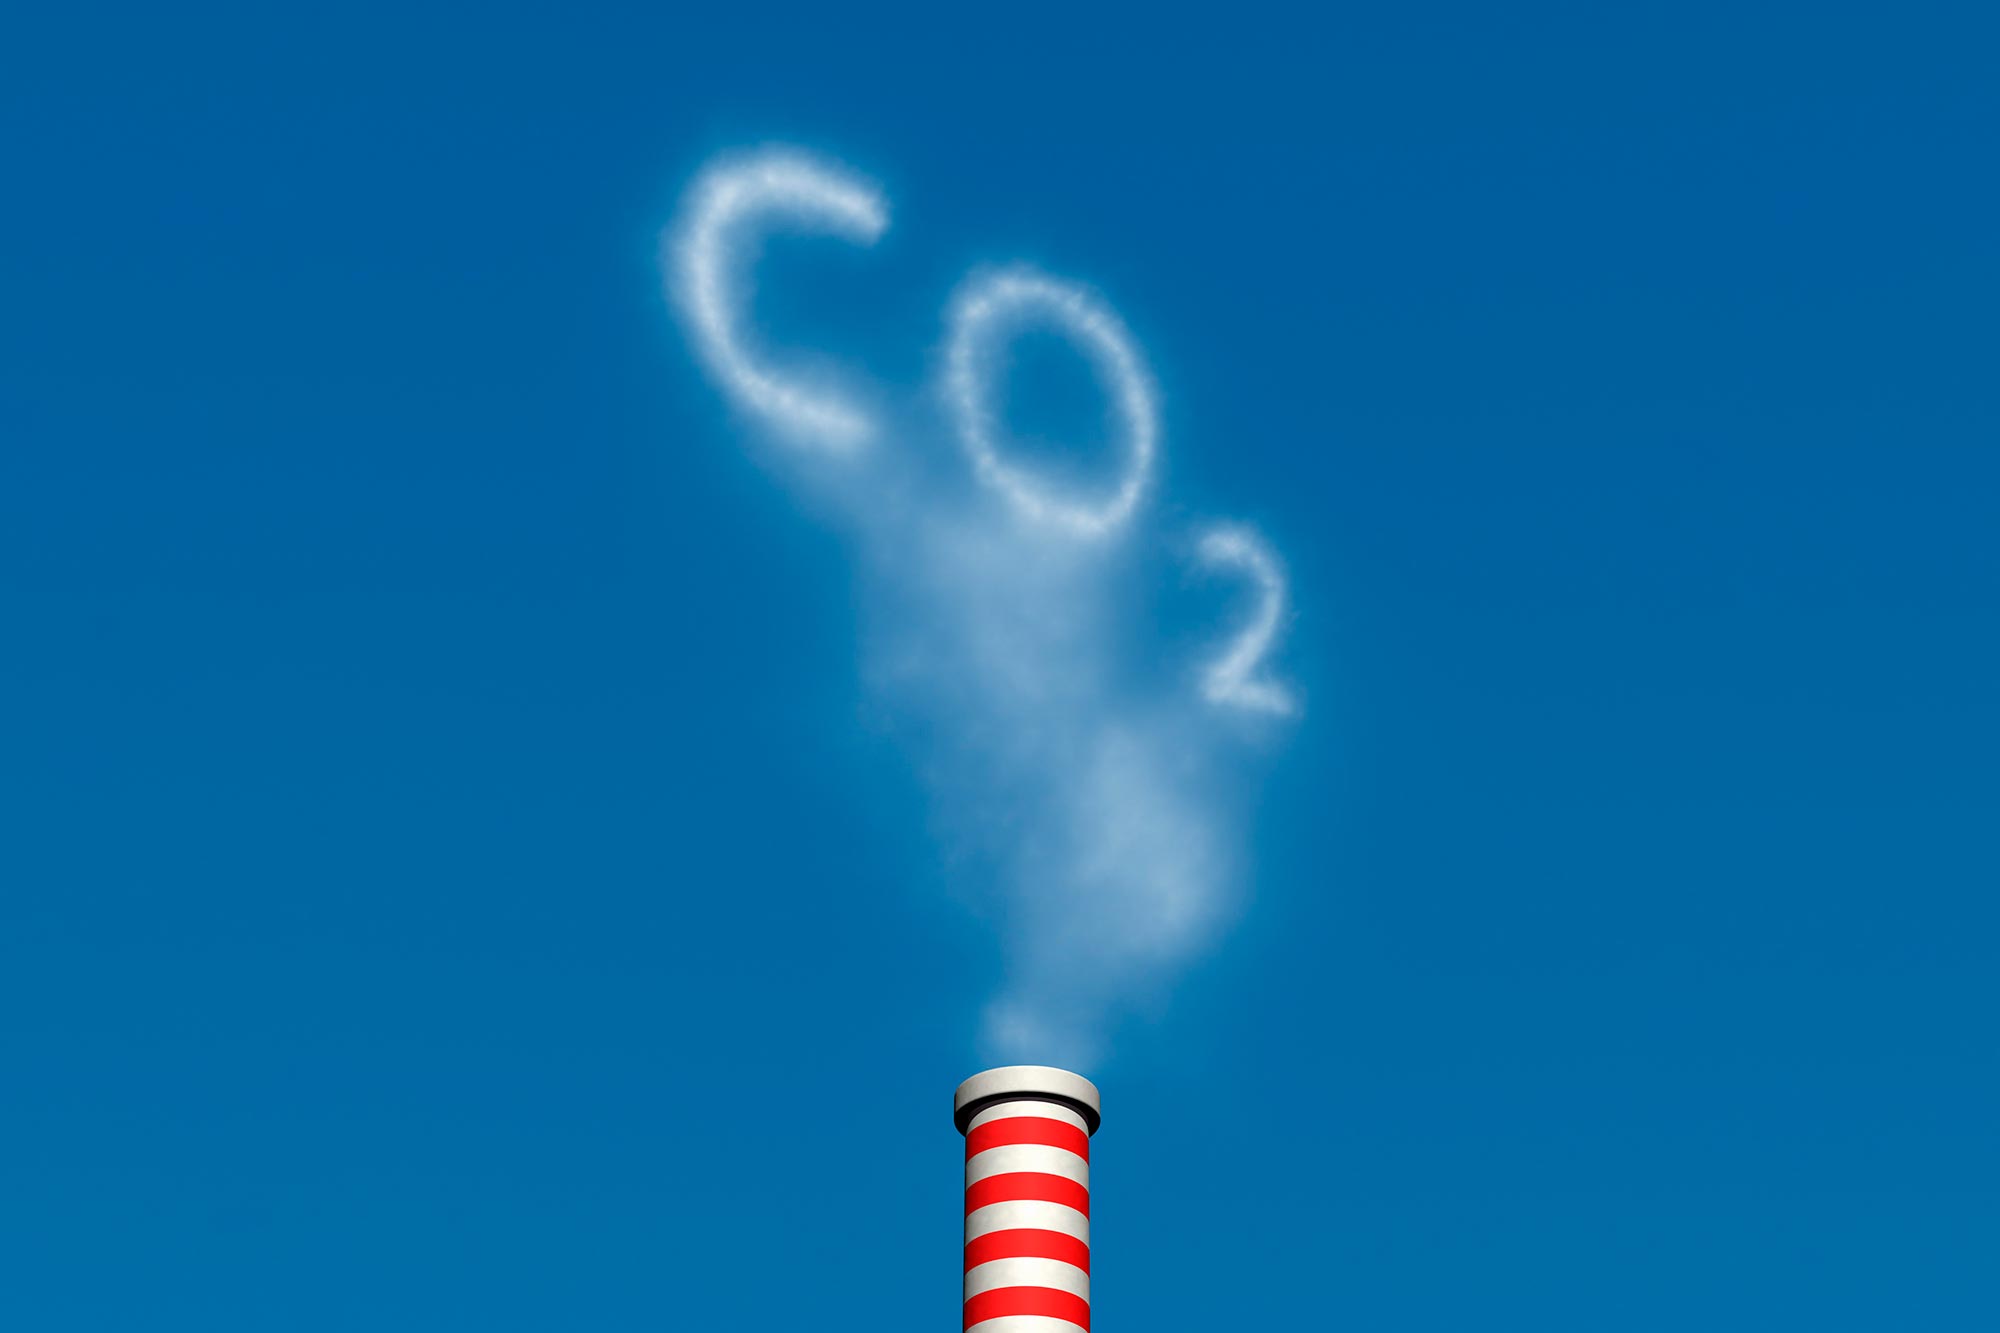 “Unprecedented” – carbon dioxide rising at a rate ten times faster than at any time in recorded history